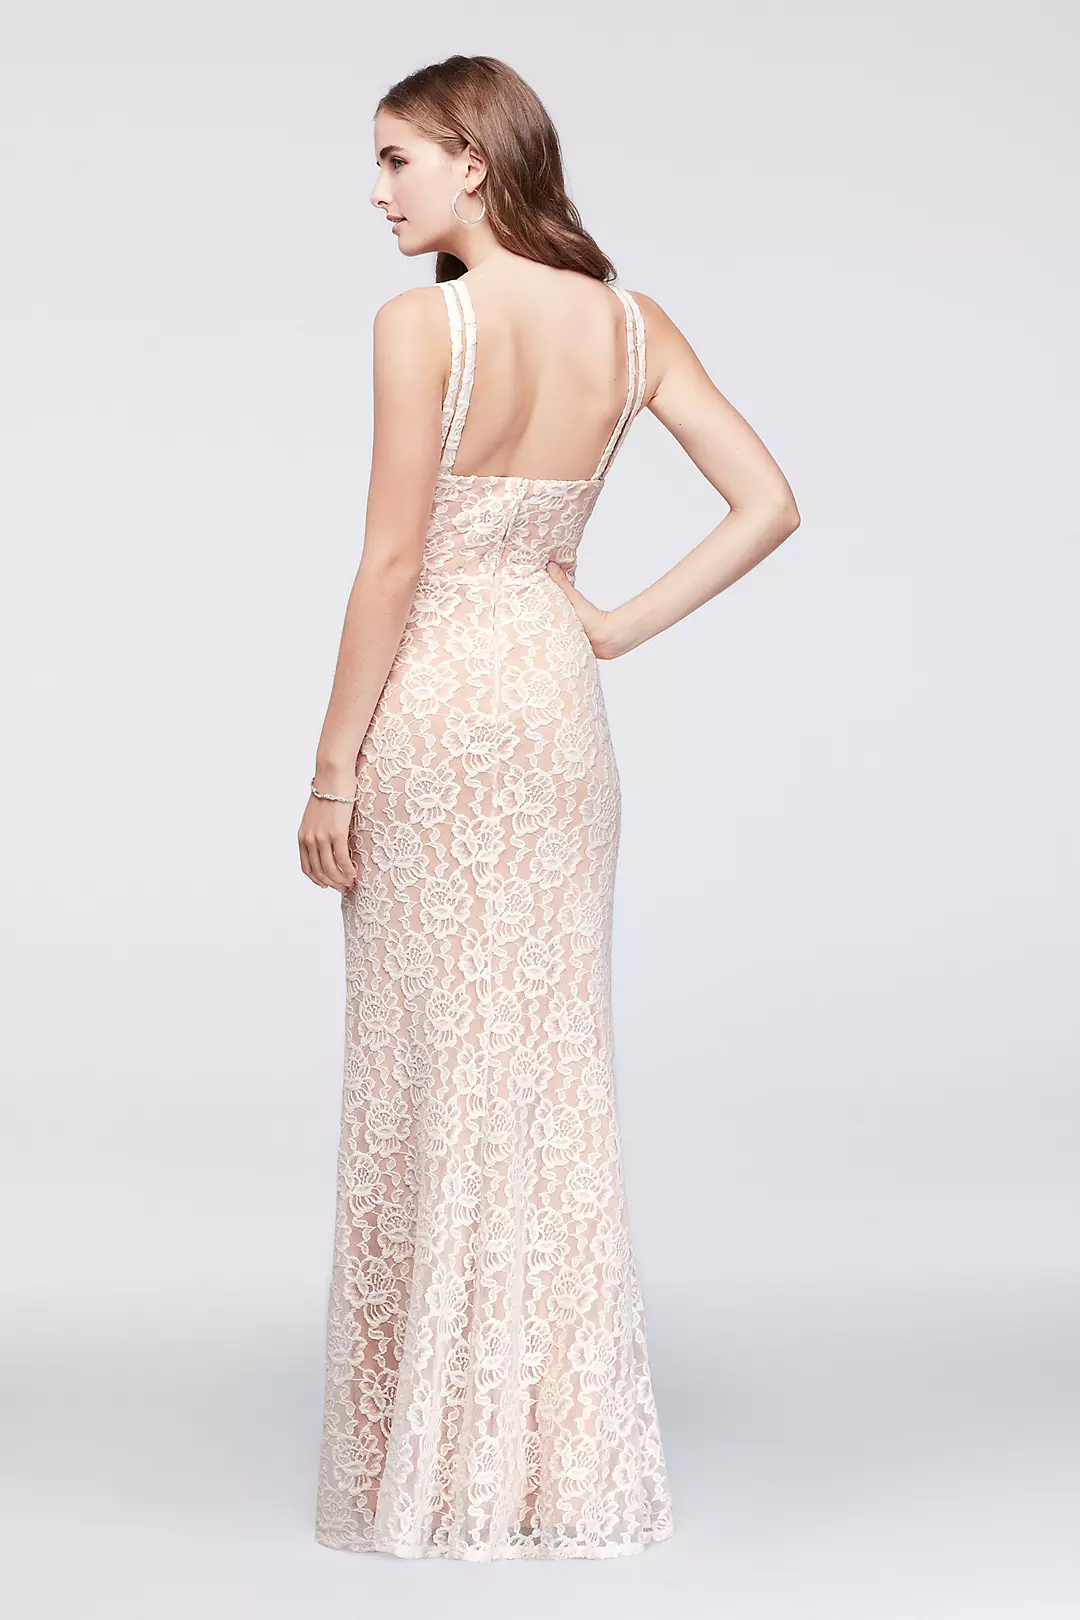 Long Lace Dress with Cutaway Bodice and Slit Skirt Image 2